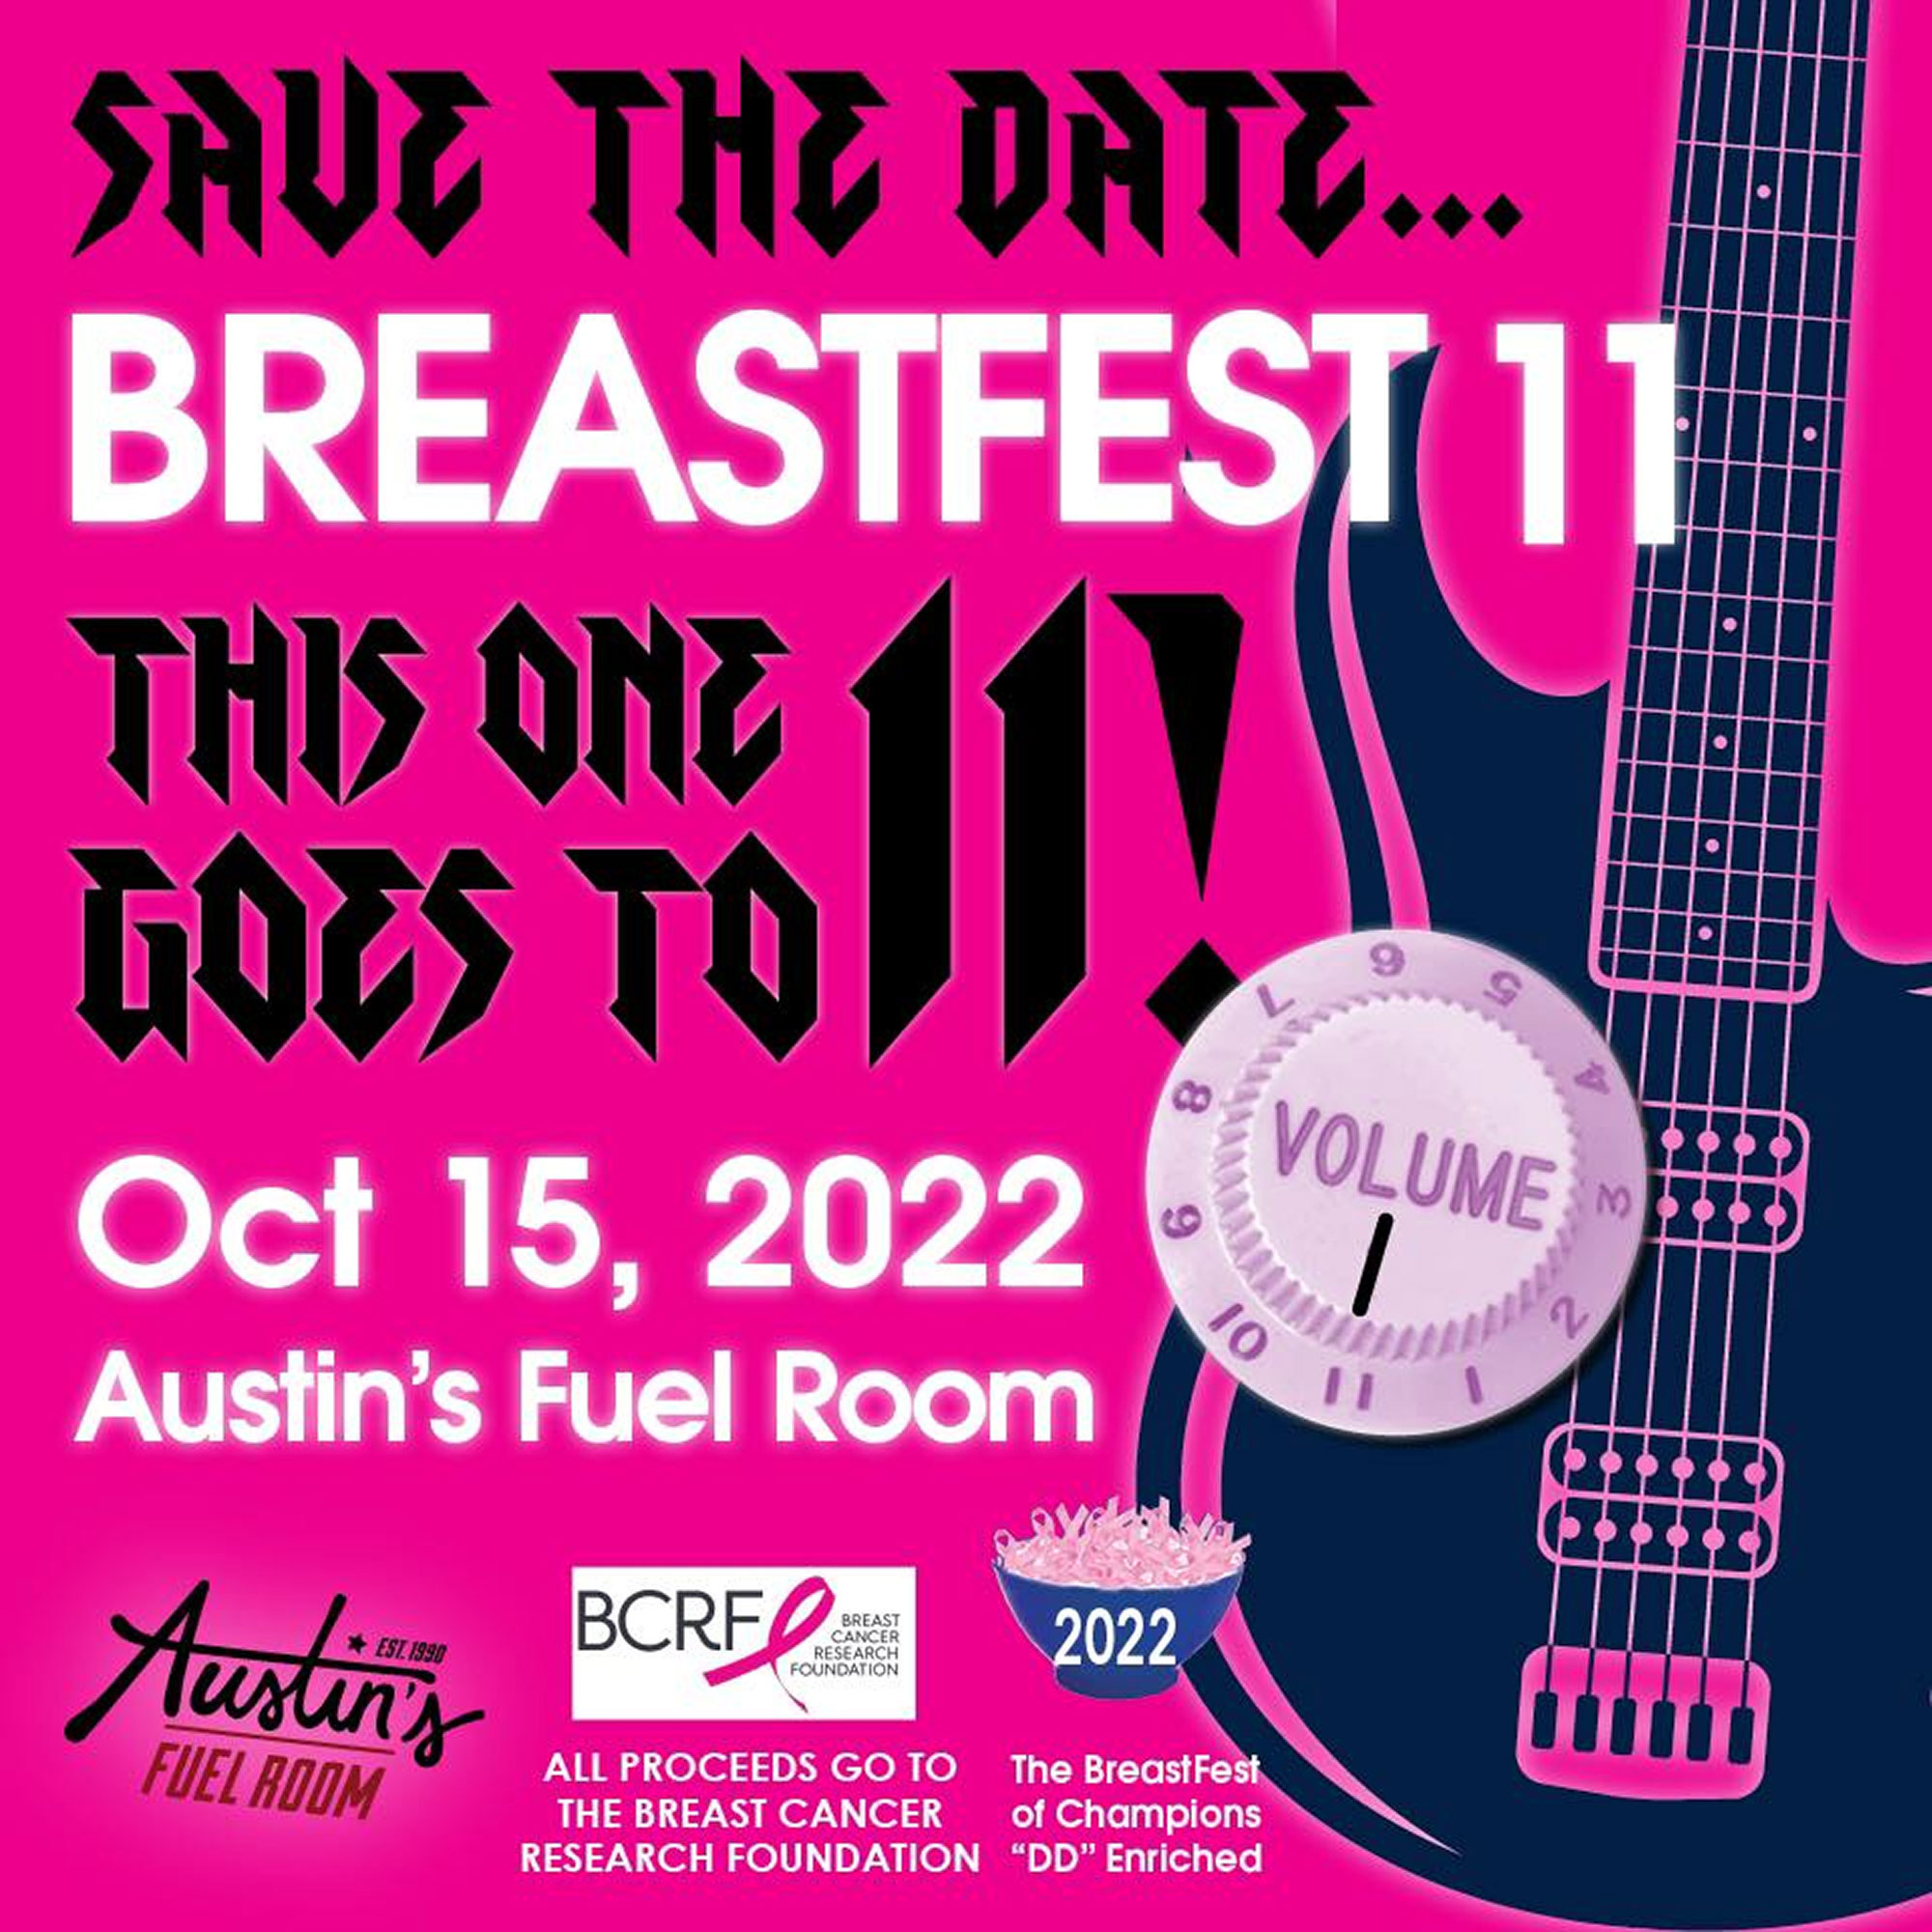 Breastfest 11 at the Fuel Room